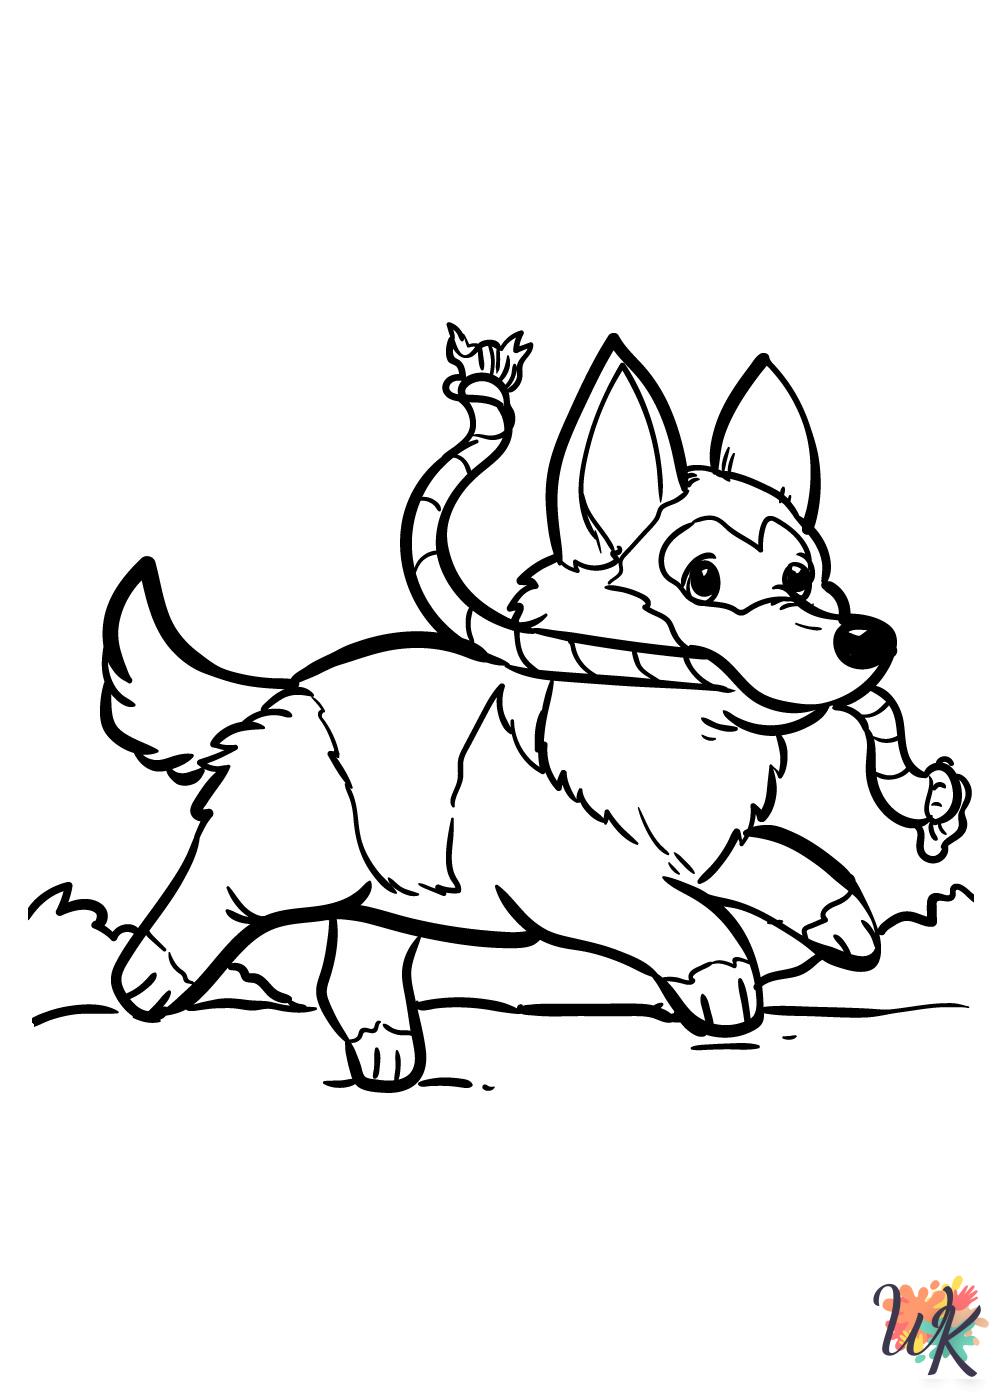 Dogs decorations coloring pages